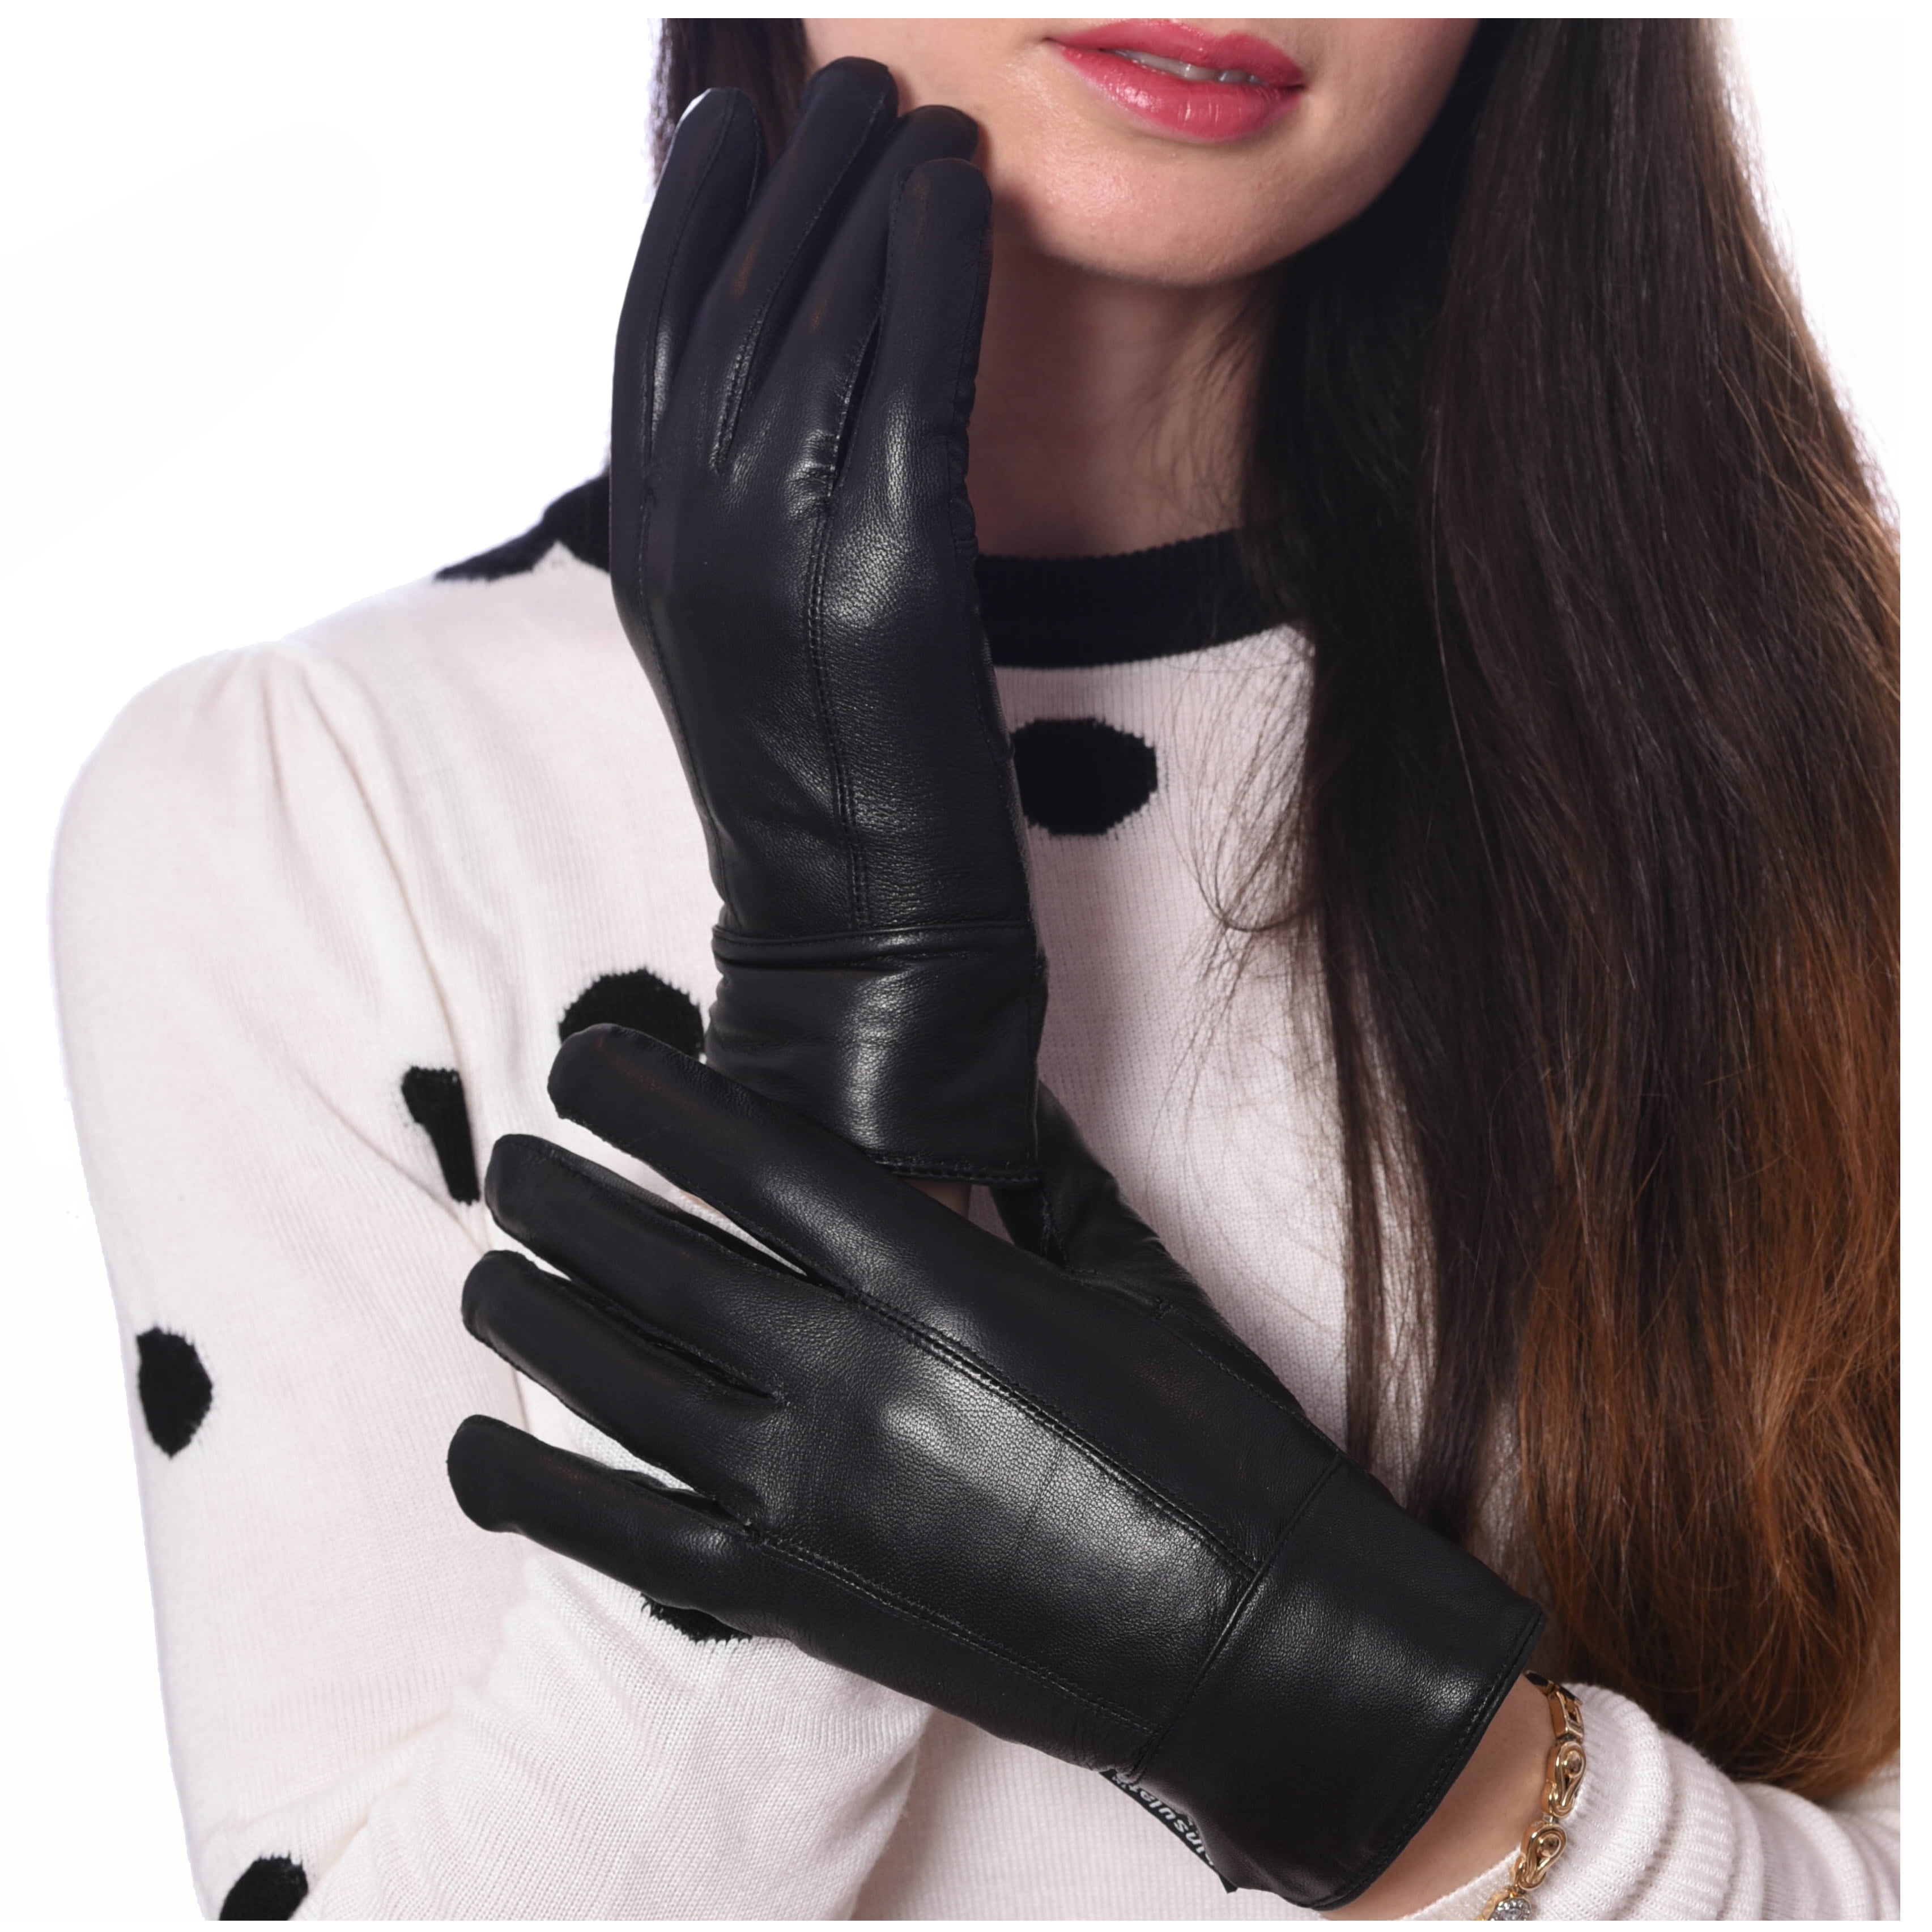 LADIES GENUINE SOFT LEATHER GLOVES PREMIUM INSULATED LINING WARM DRIVING 